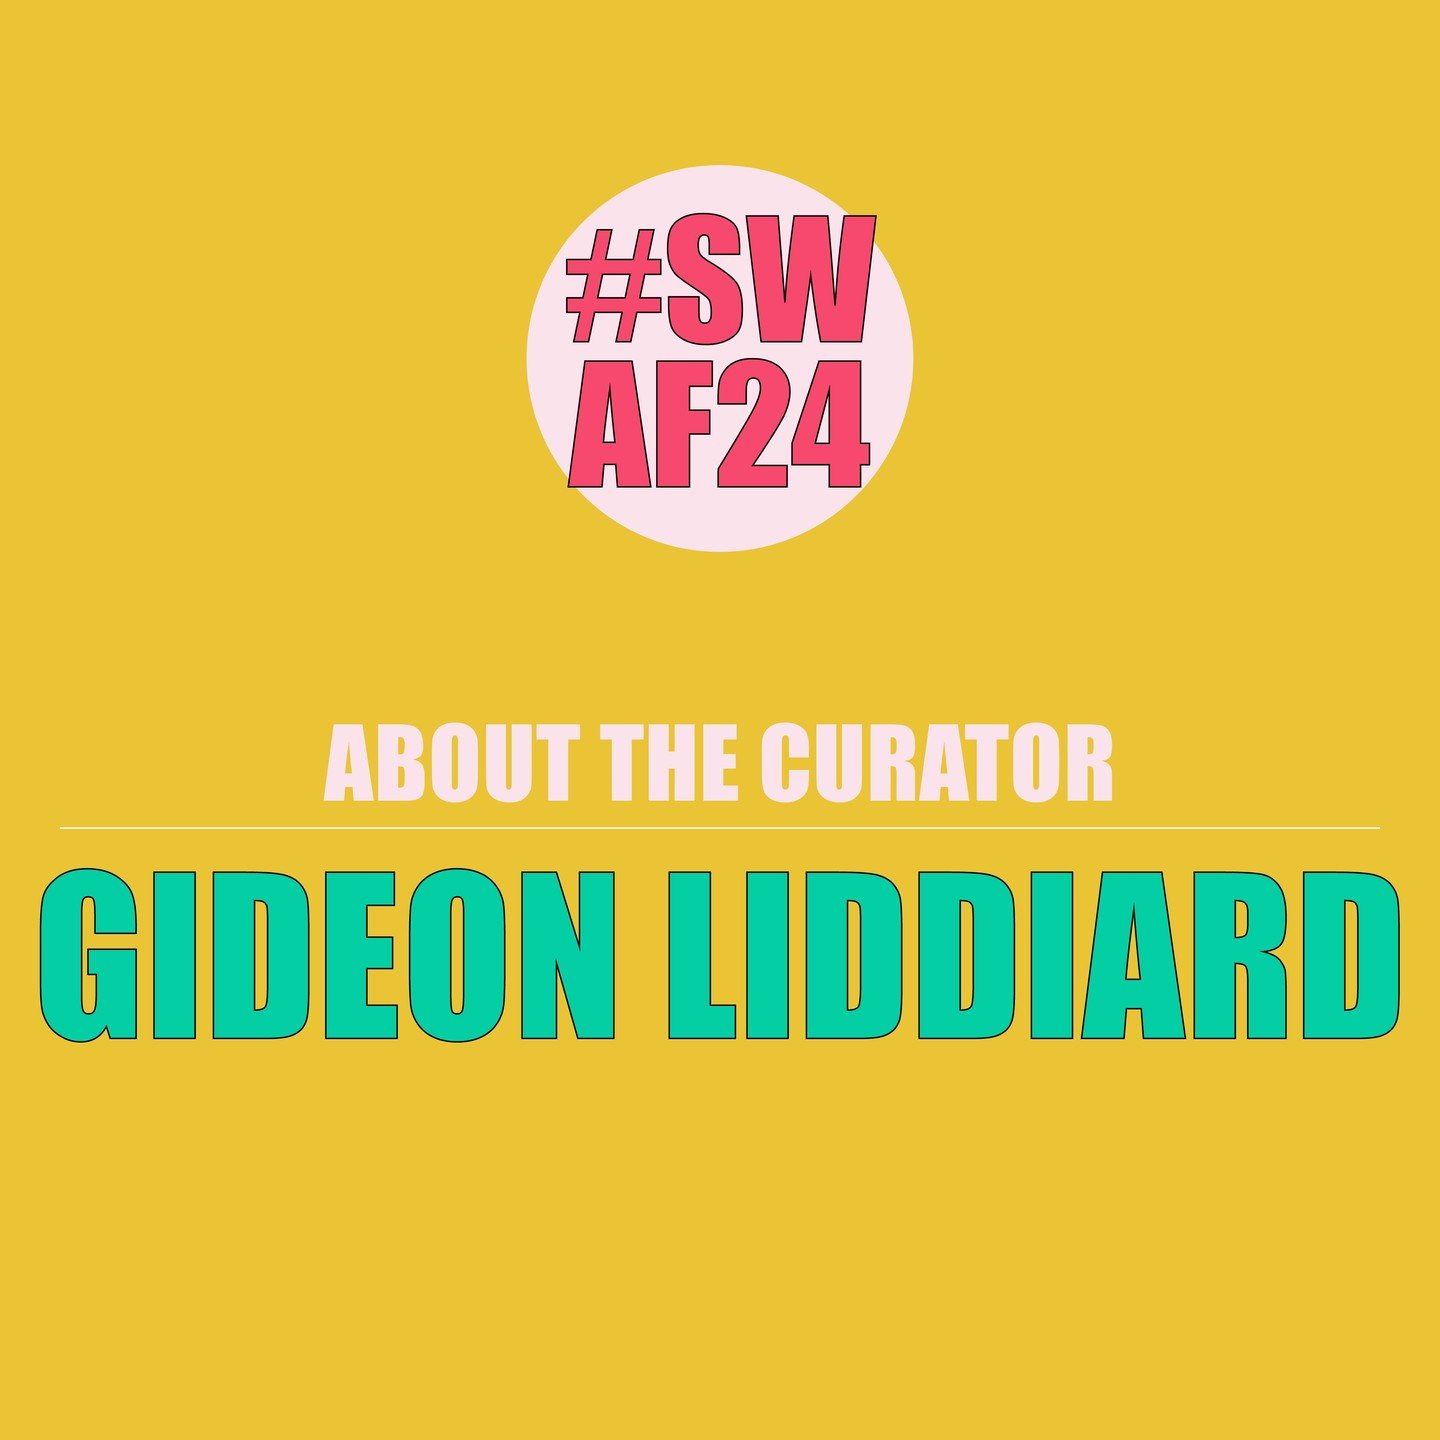 Exhibition: Swindon In Abstract
About The Curator: Gideon Liddiard 
@gideon.liddiard 

I am a Swindon-based, Autistic photographer, principally specialising in music photography, and building a documentary history of Swindon's music scene. I also hav